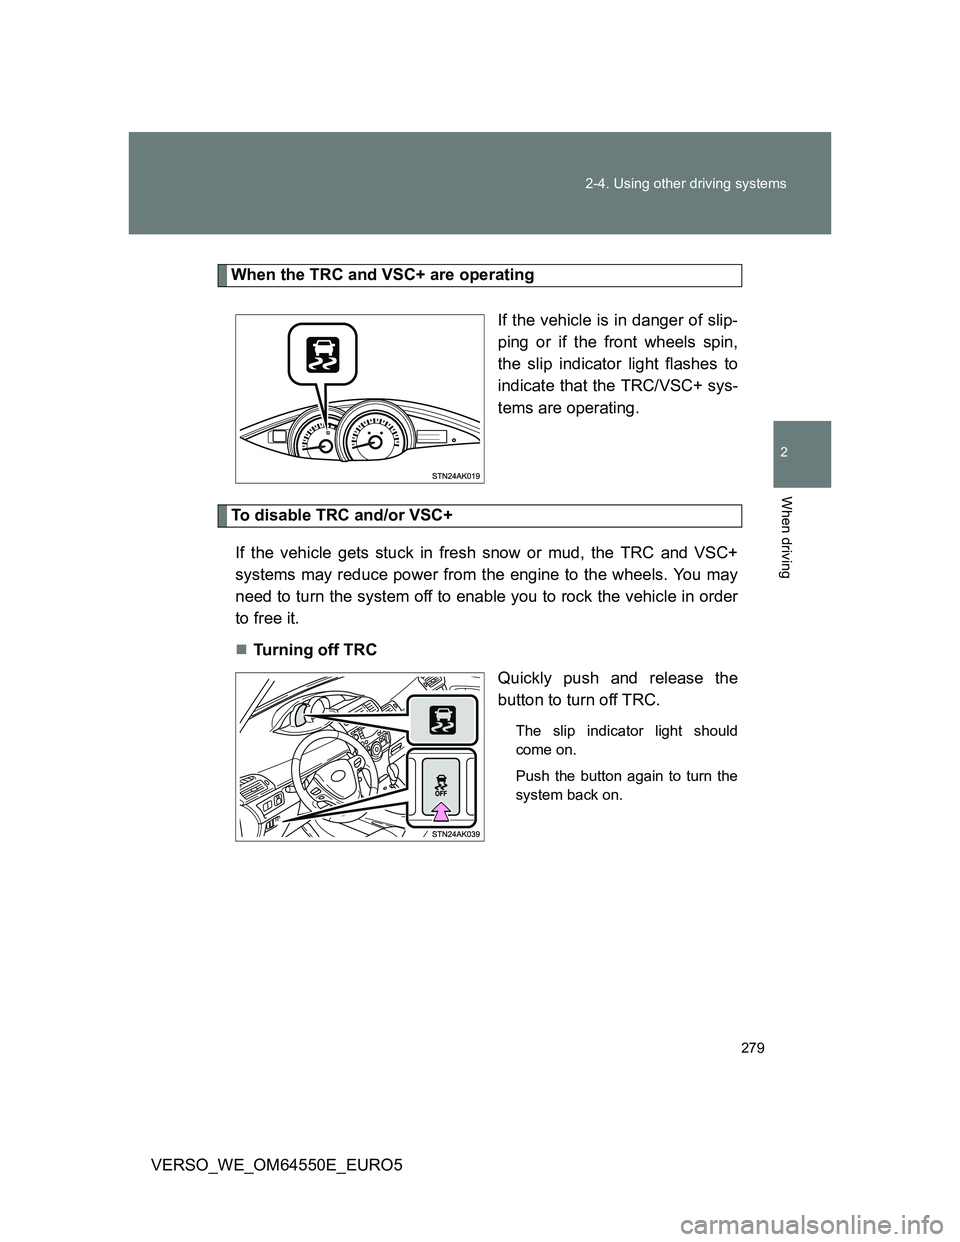 TOYOTA VERSO 2013  Owners Manual 279 2-4. Using other driving systems
2
When driving
VERSO_WE_OM64550E_EURO5
When the TRC and VSC+ are operating
If the vehicle is in danger of slip-
ping or if the front wheels spin,
the slip indicato